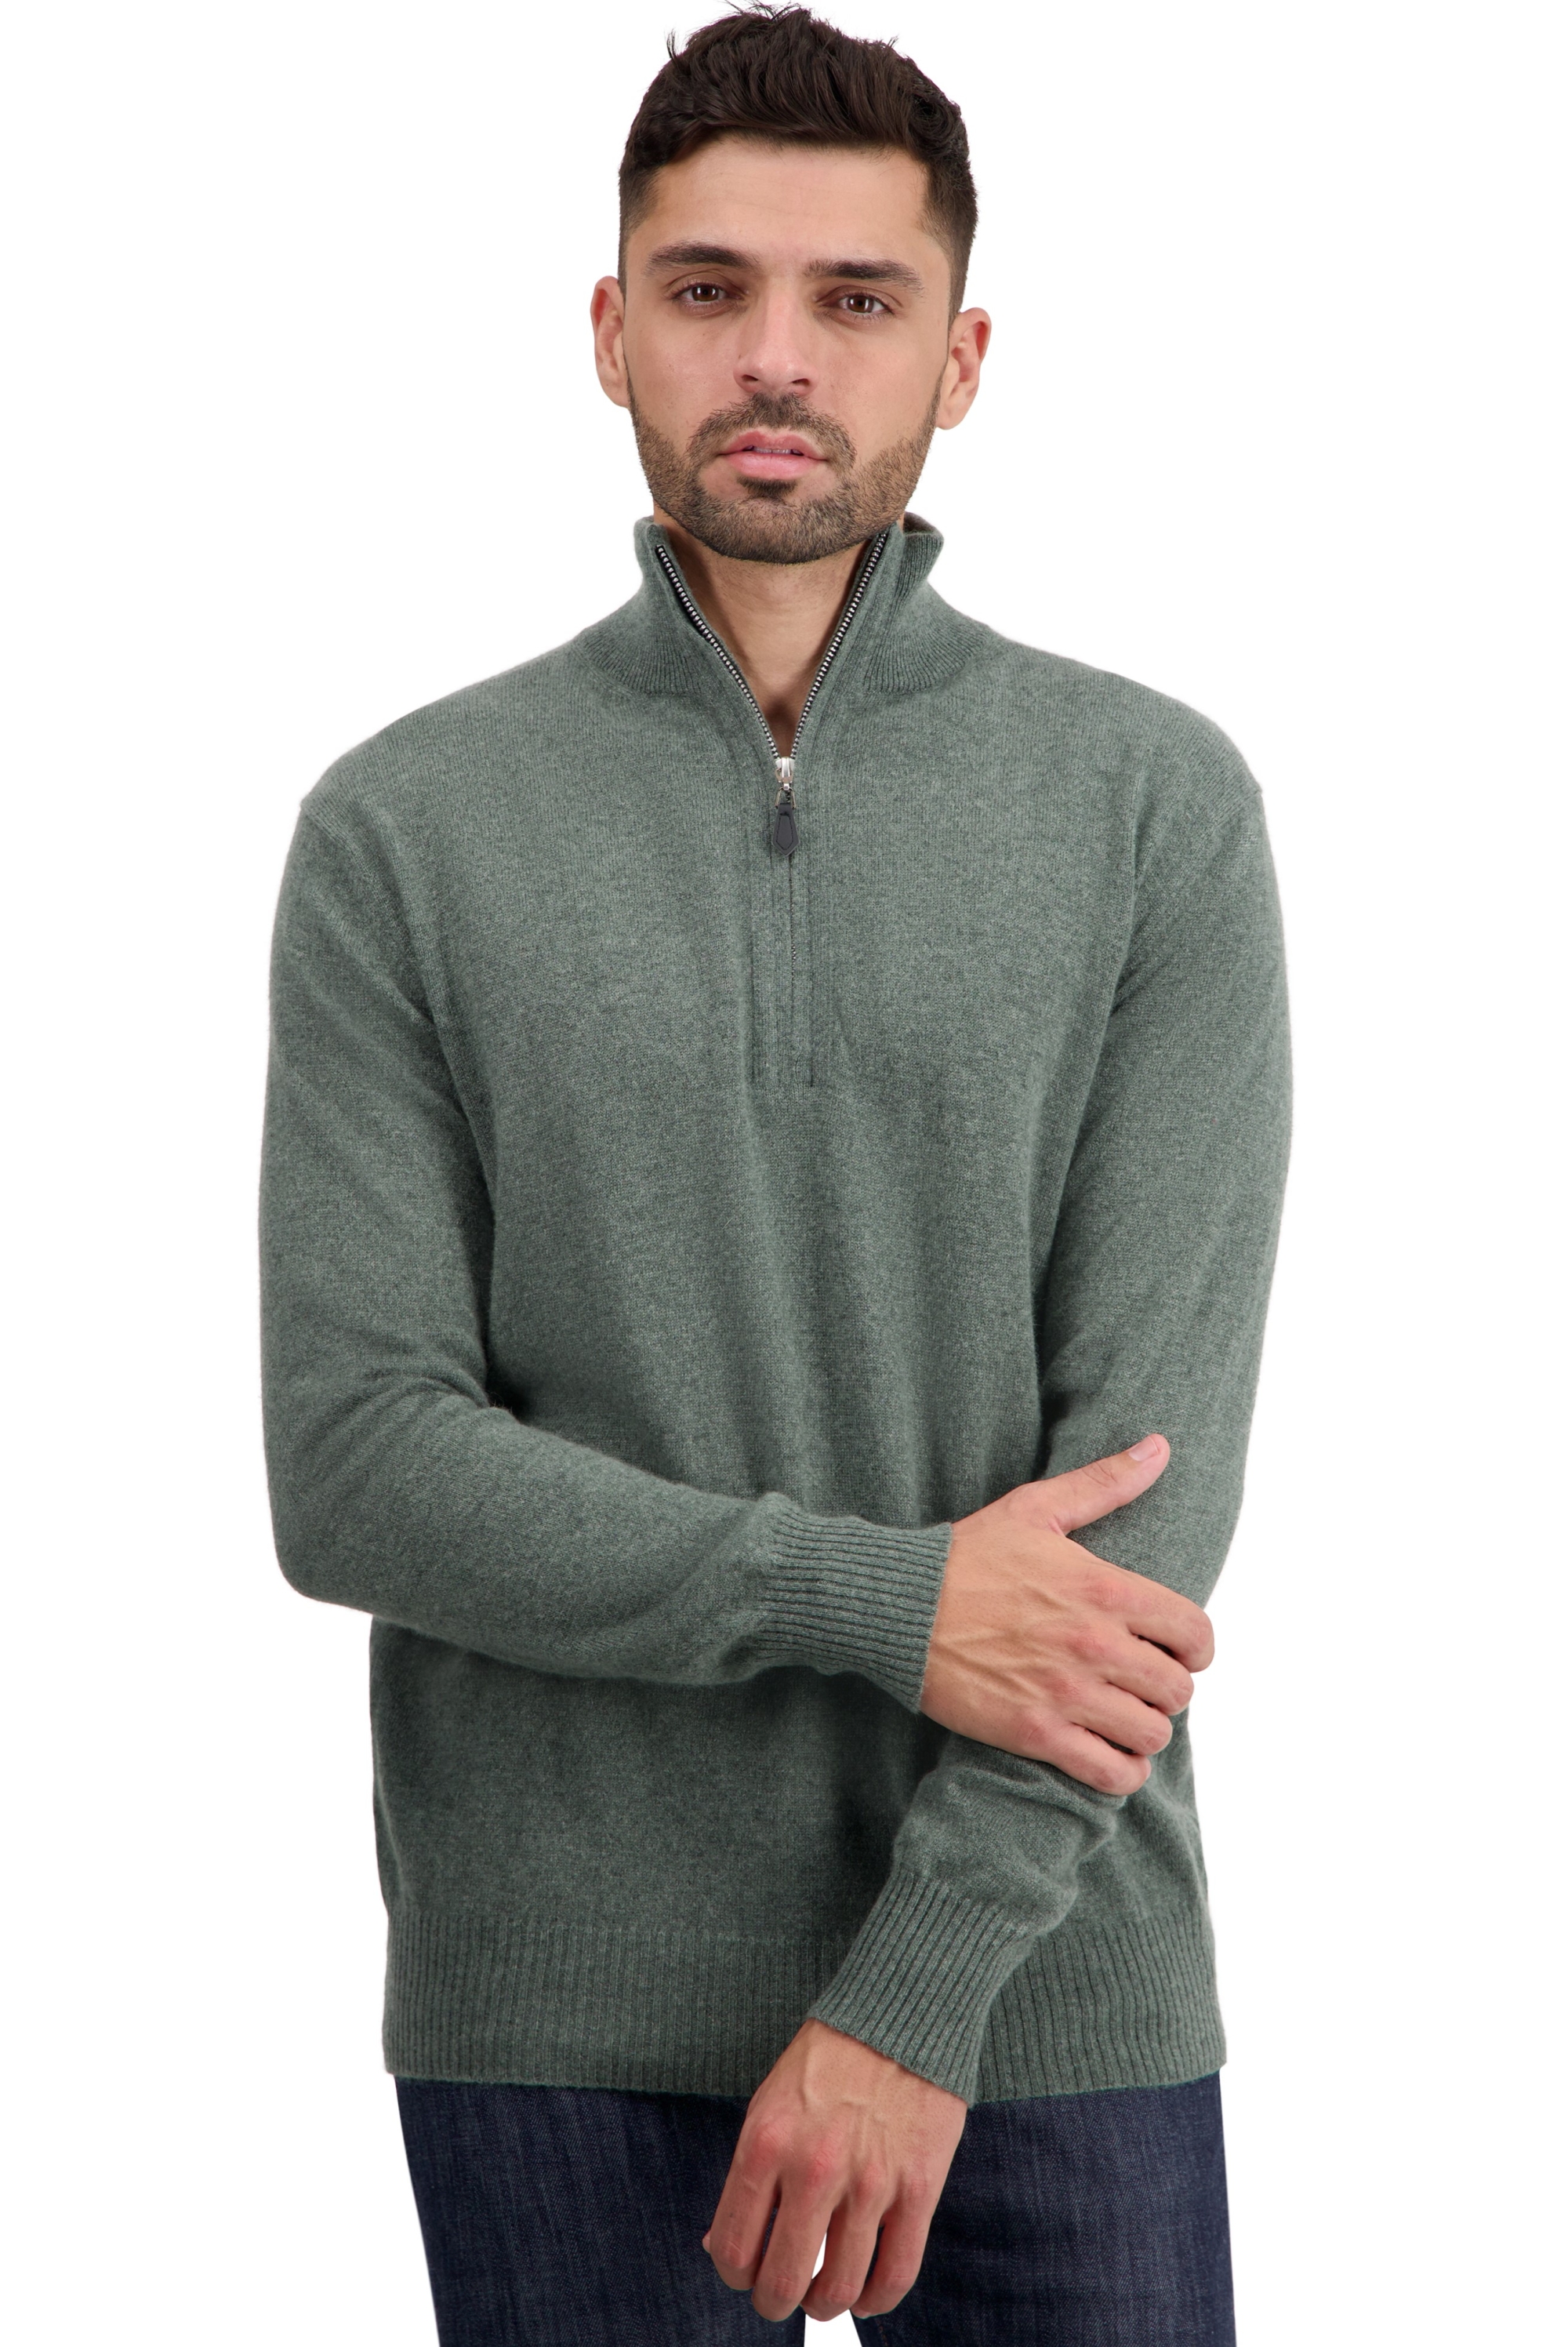 Cashmere men basic sweaters at low prices toulon first military green 2xl